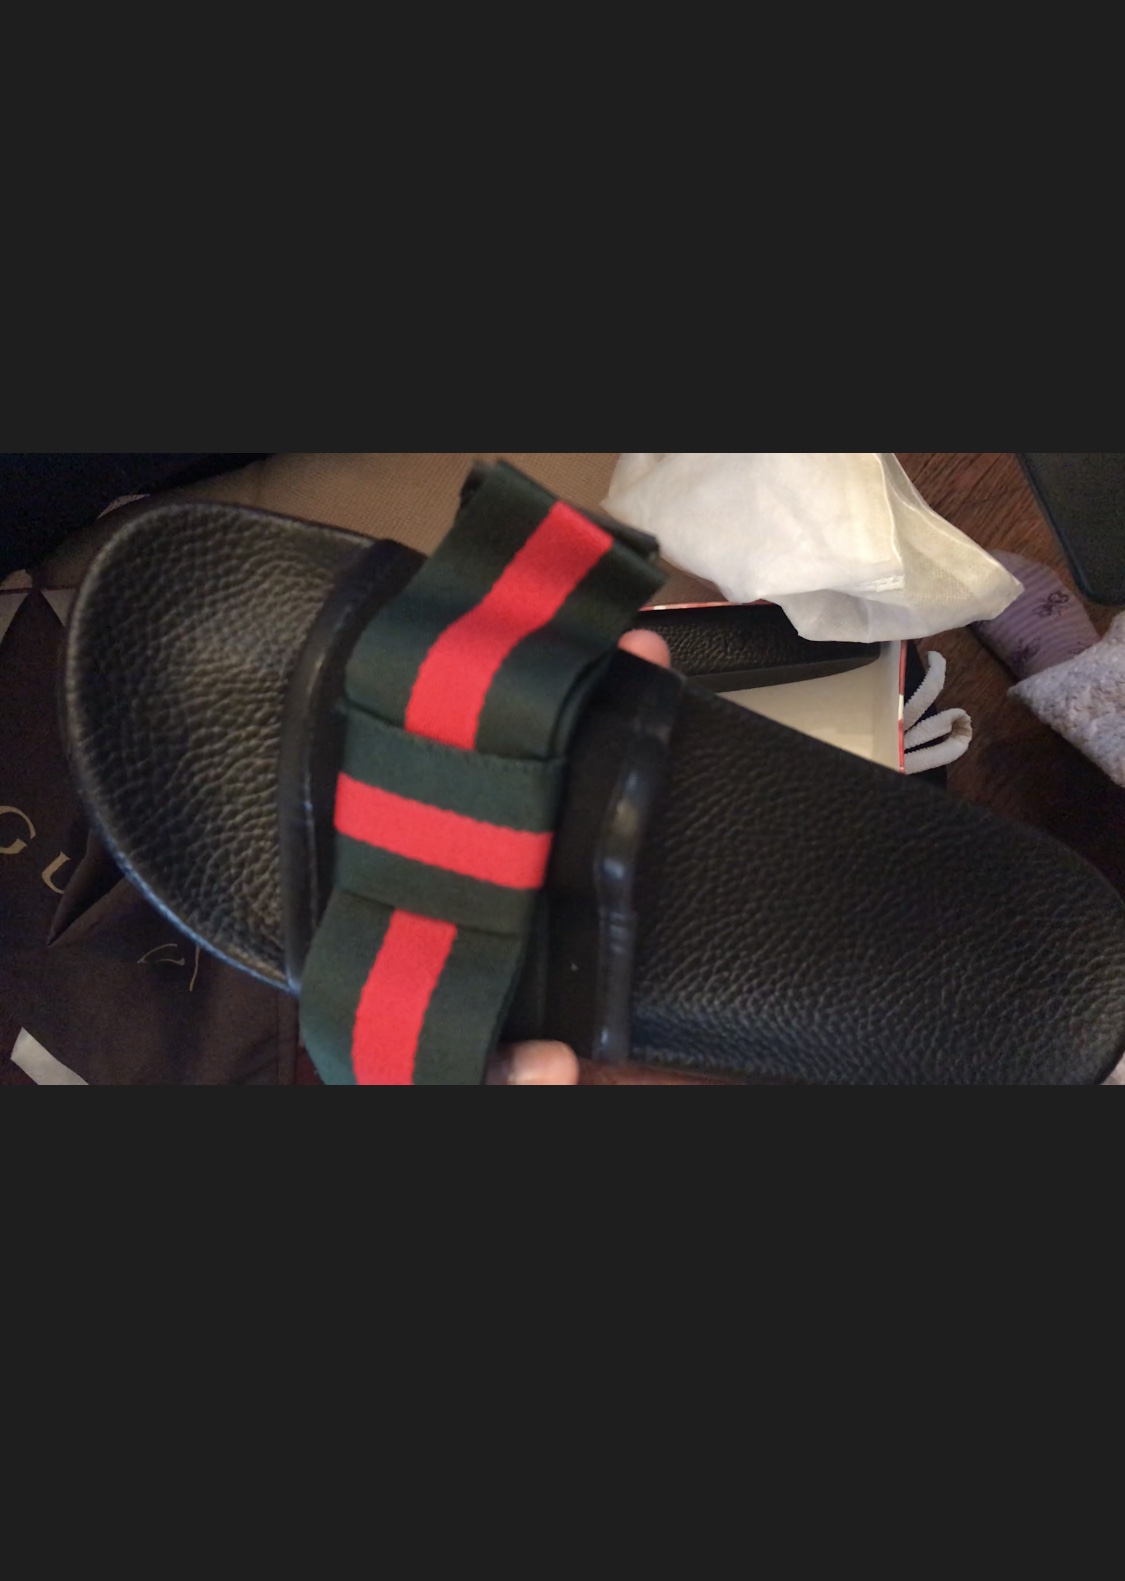 Knock off pool slides received from seller